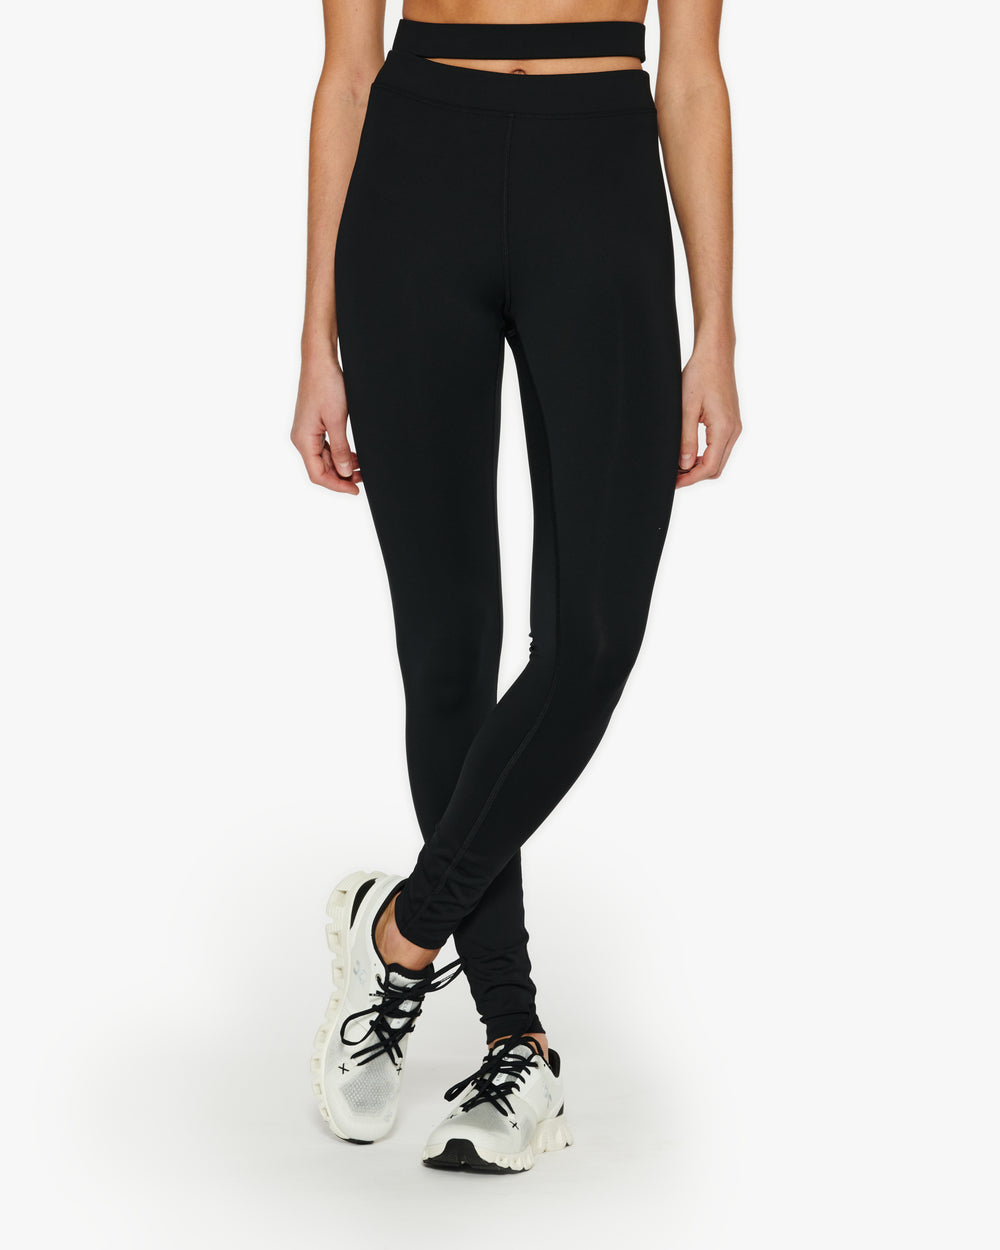 Airlift High-Waisted All Access Legging